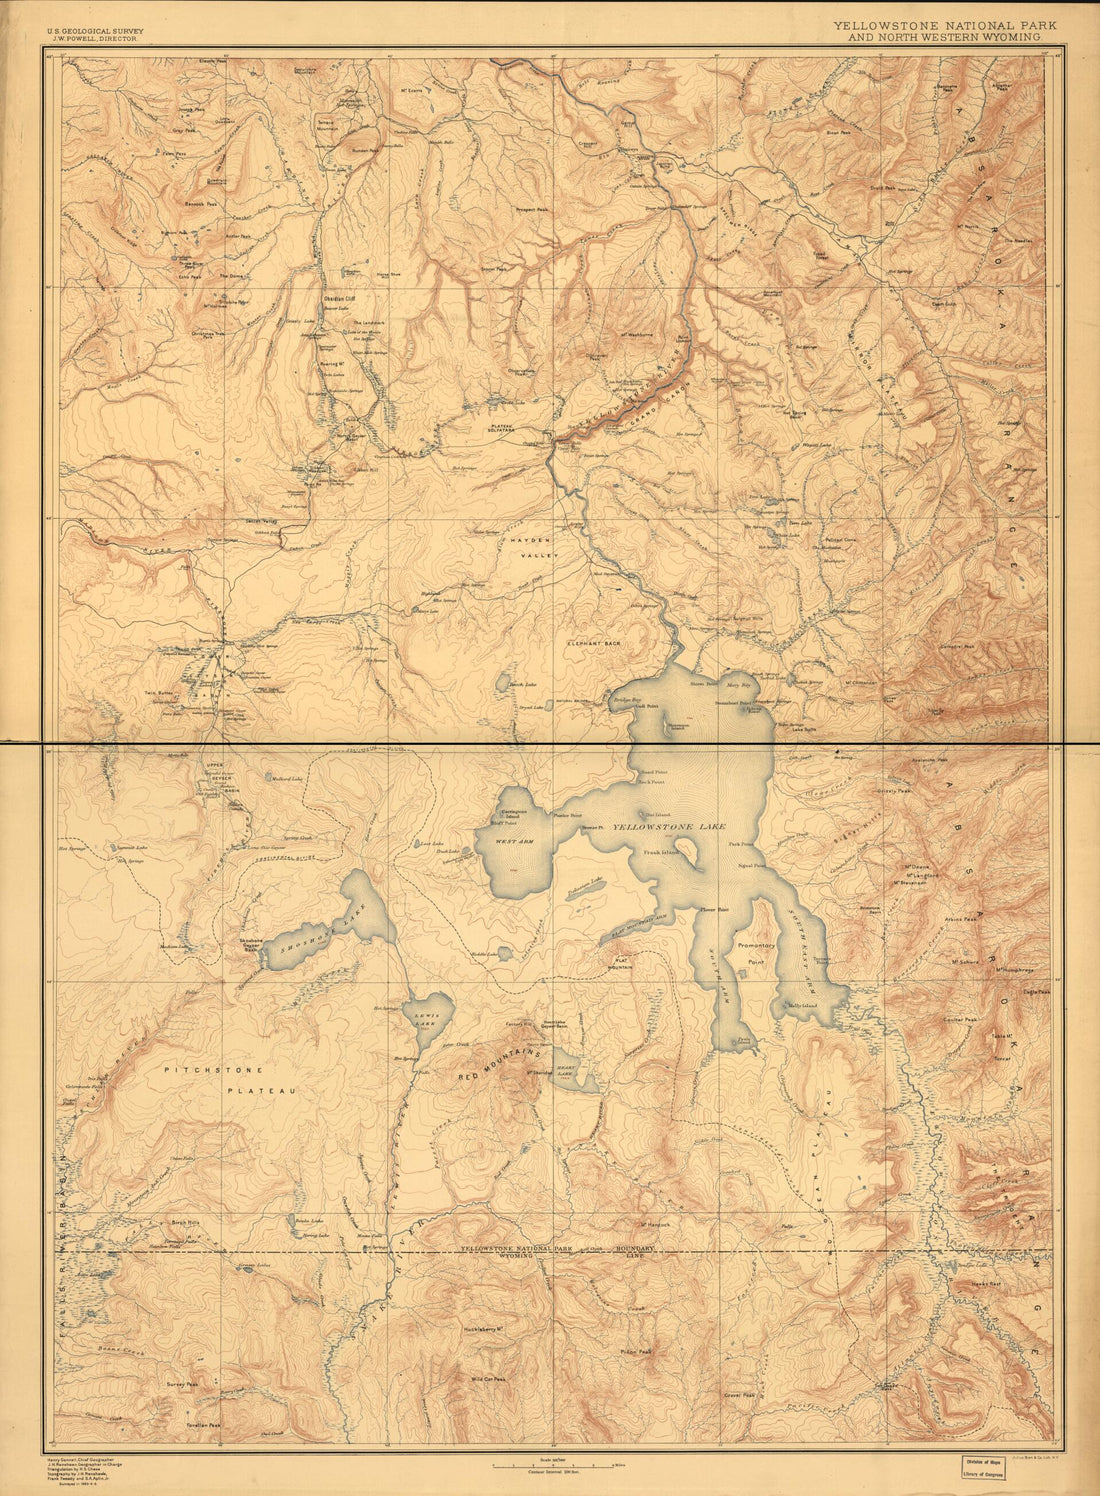 This old map of Yellowstone National Park and North Western Wyoming from 1885 was created by Henry Gannett,  Geological Survey (U.S.), John Wesley Powell, John H. Renshawe in 1885